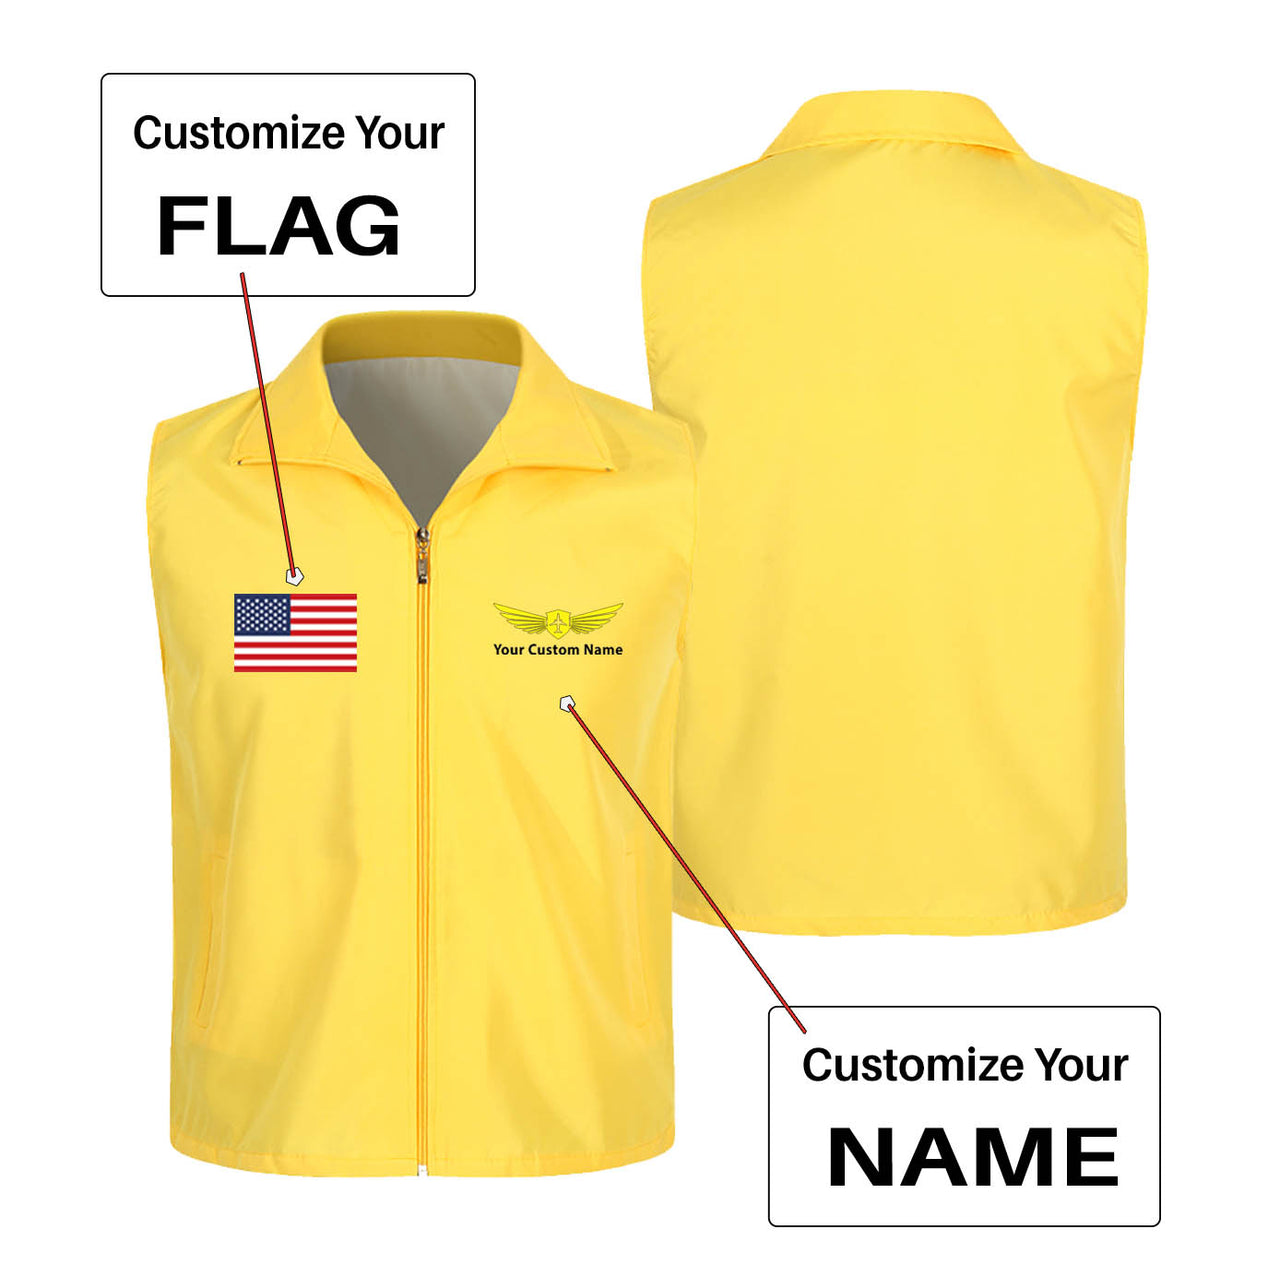 Custom Flag & Name with "Badge 2" Designed Thin Style Vests